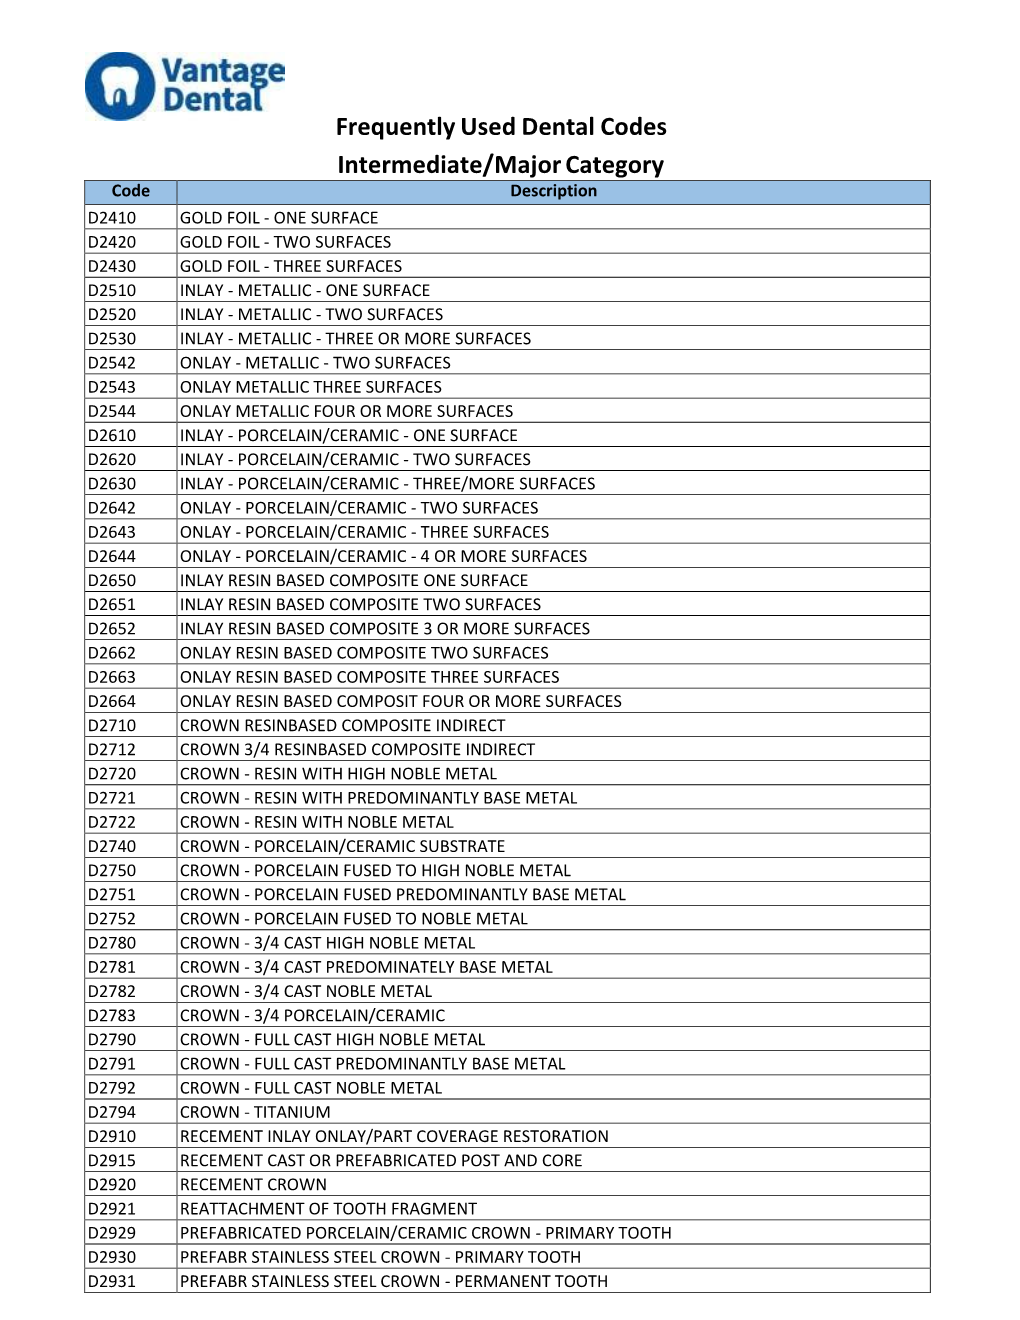 Frequently Used Dental Codes Intermediate/Major Category